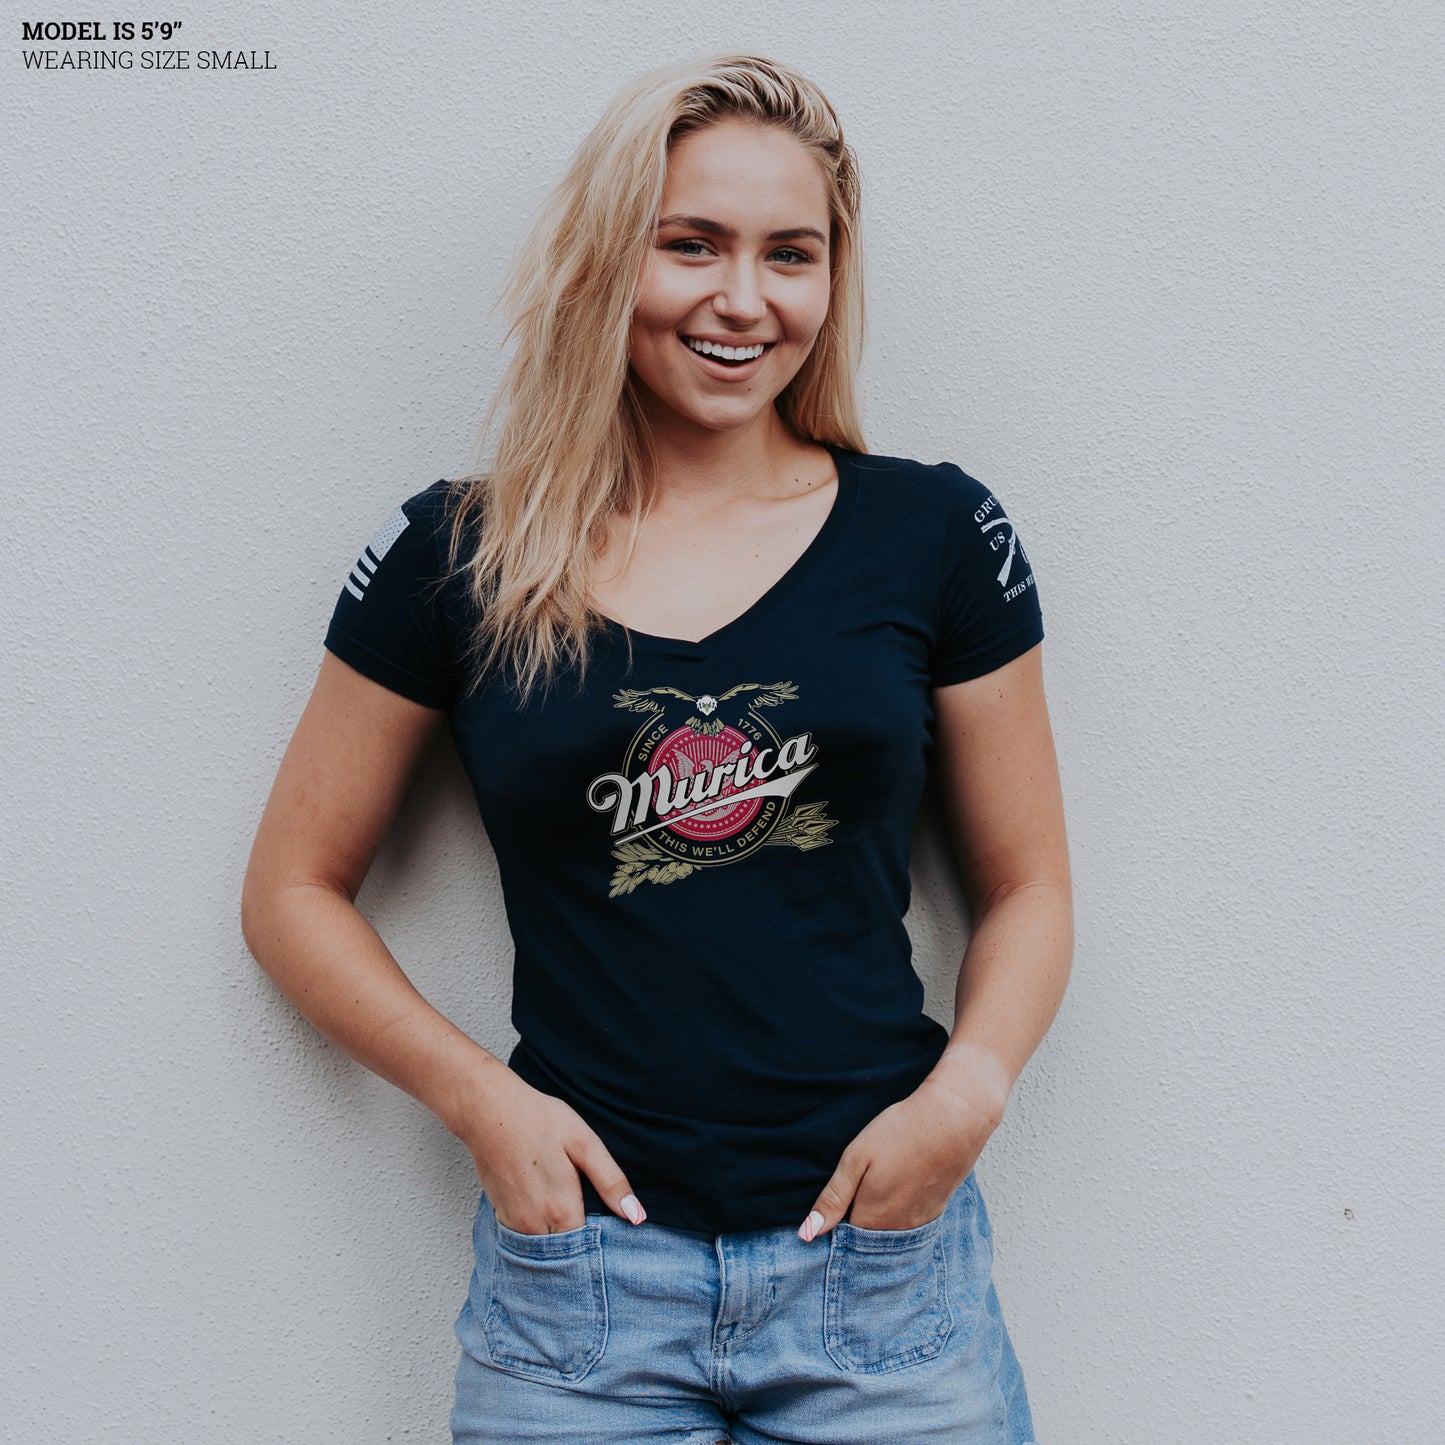 patriotic clothes for women - Murica Since 1776 Shirt 